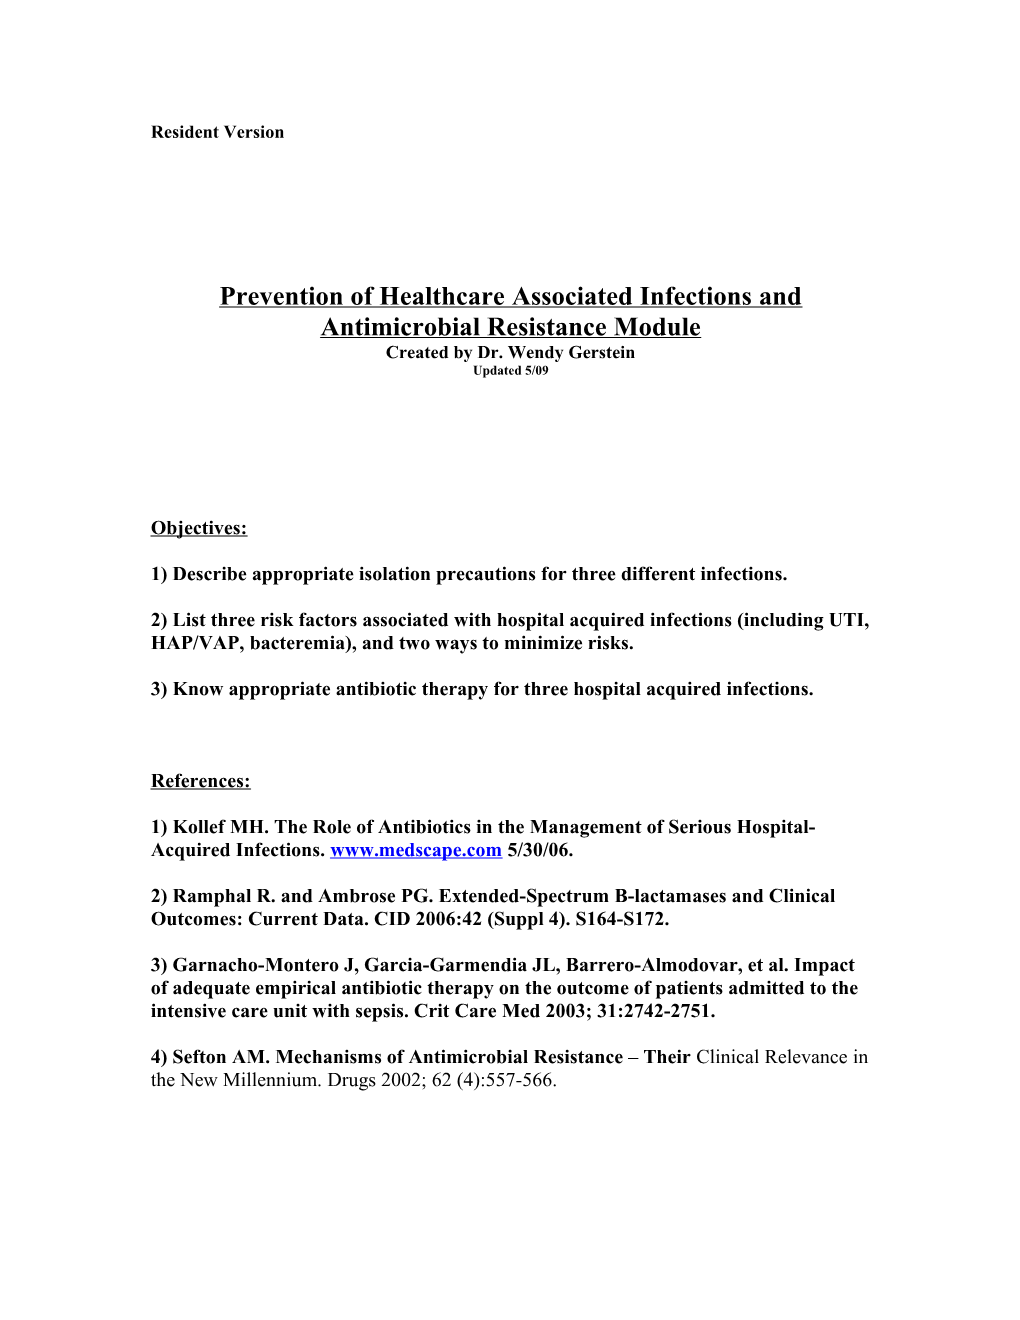 Objectives for Prevention of Healthcare Associated Infections and Antimicrobial Resistance